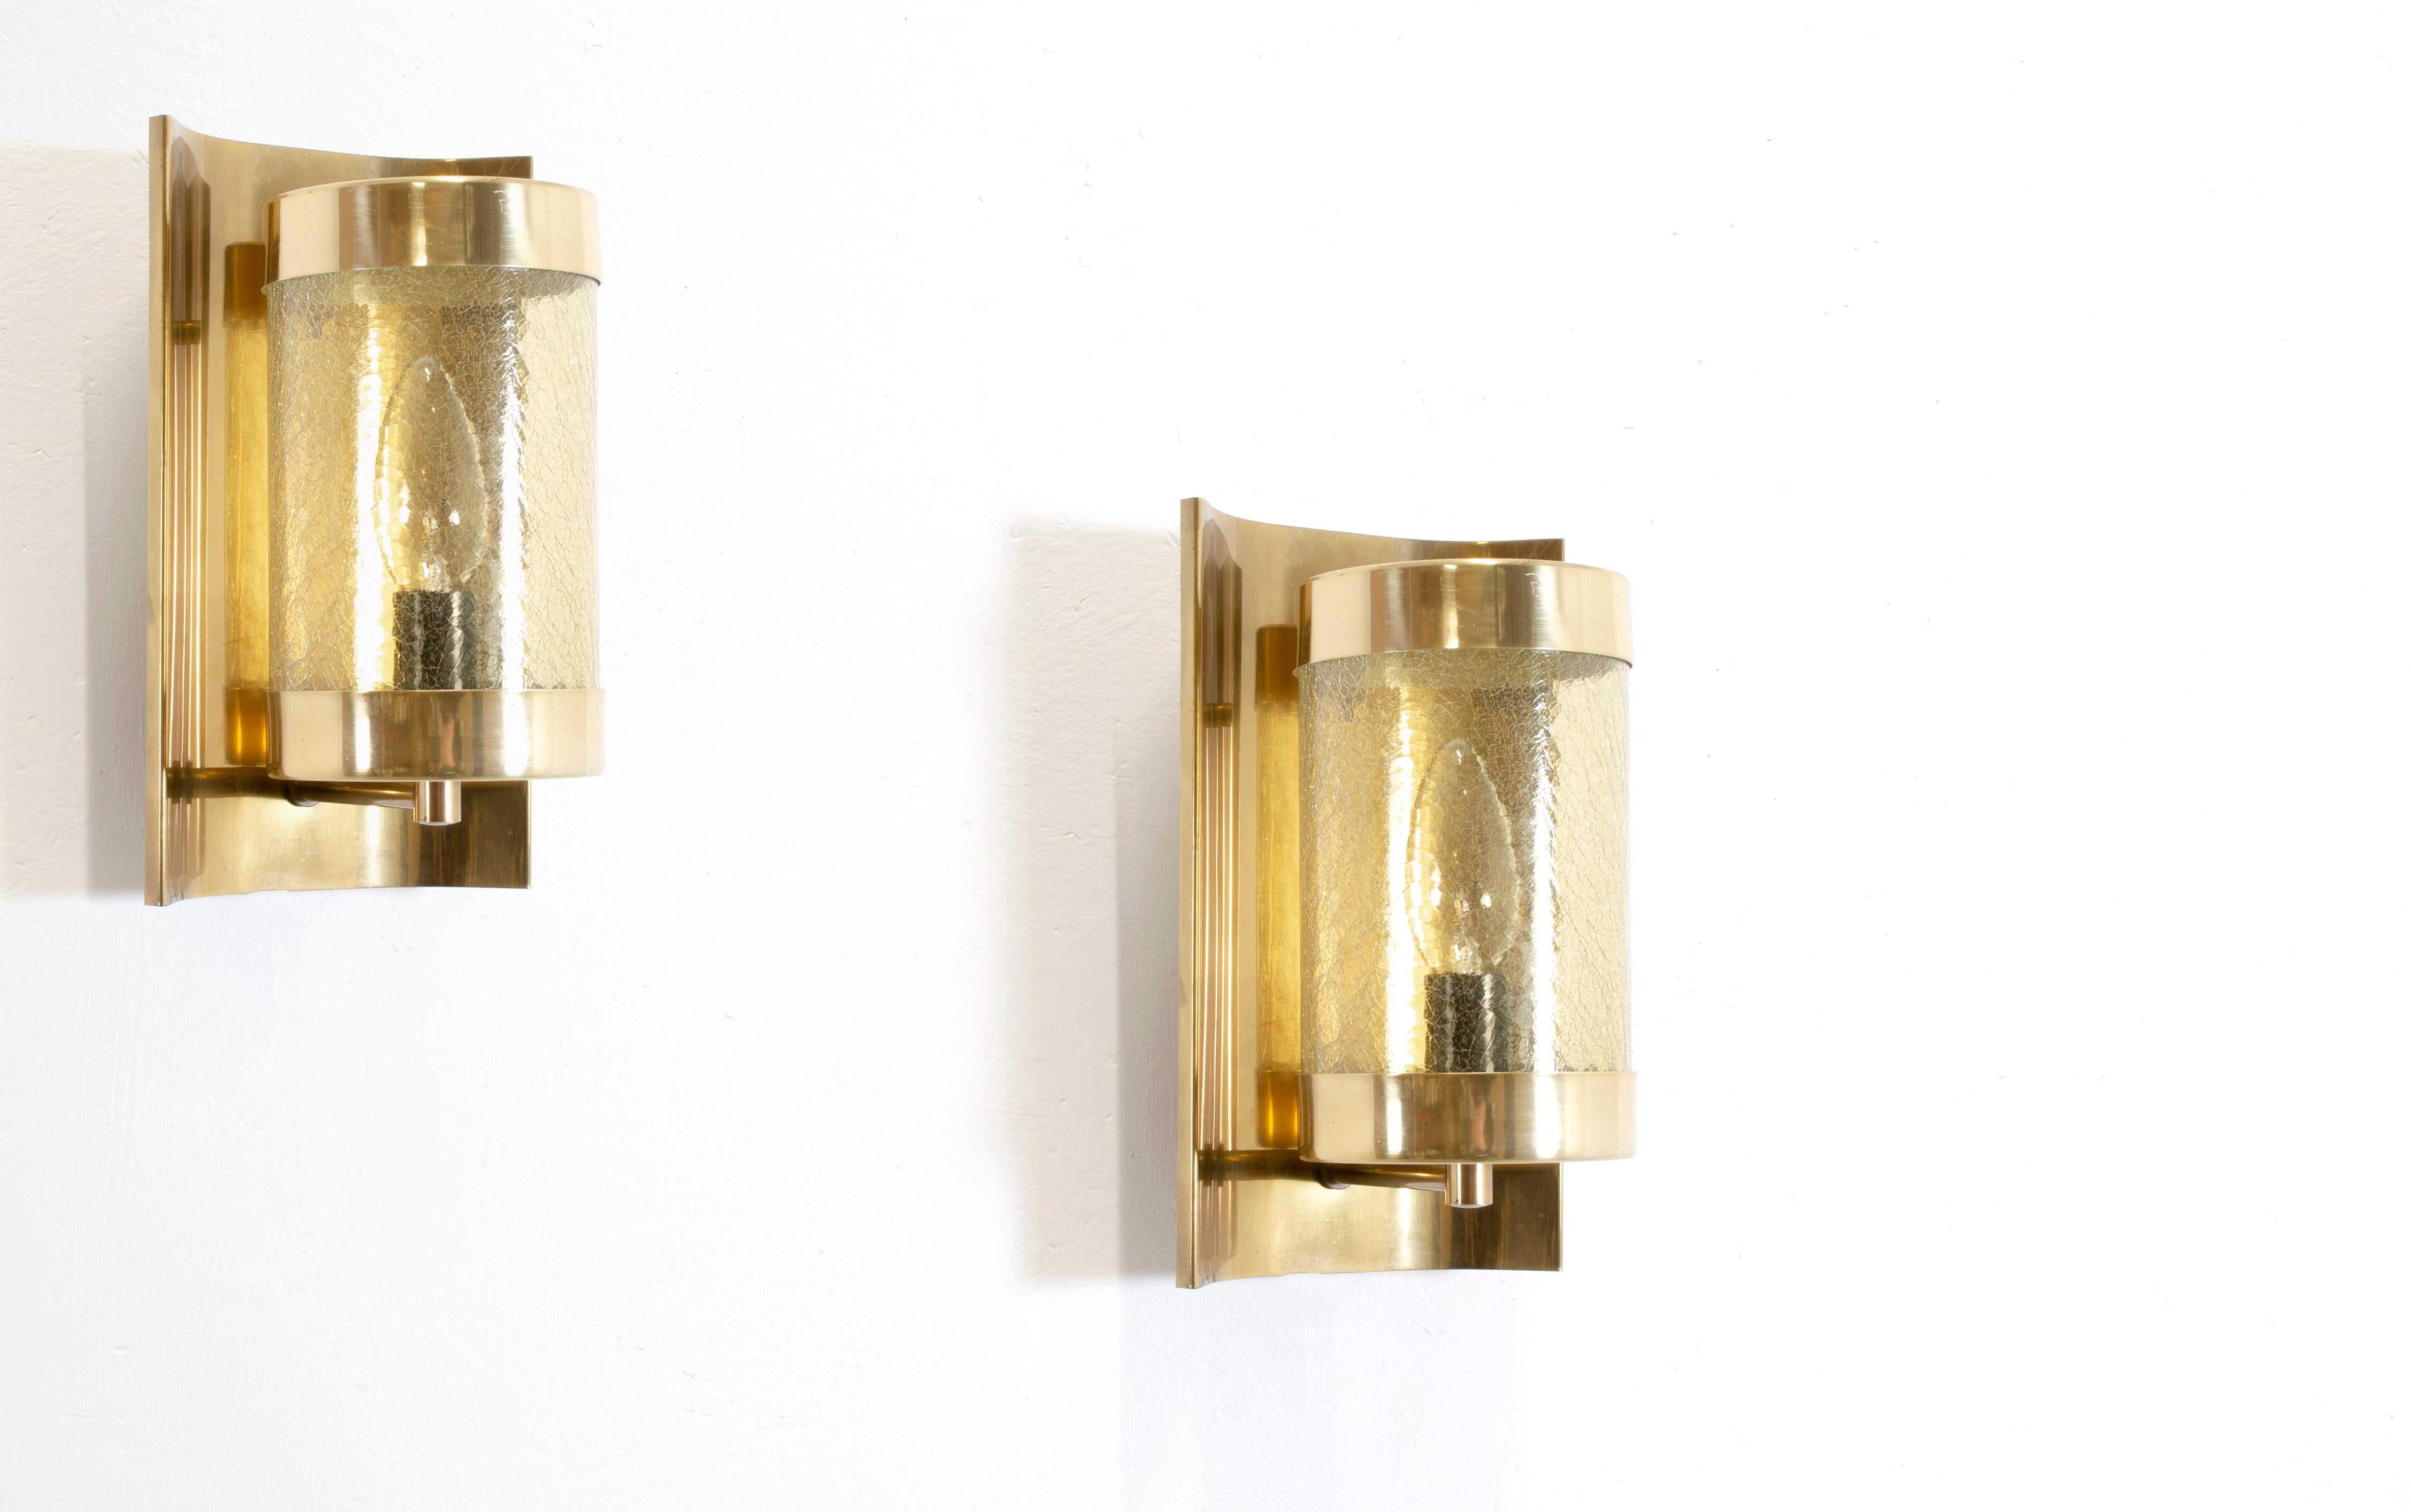 Wonderful pair of wall lights in brass with shades in glass. Designed and made in Norway from circa 1970s second half. Both lamps are fully working and in good vintage. Max 40W, E14 bulbs.